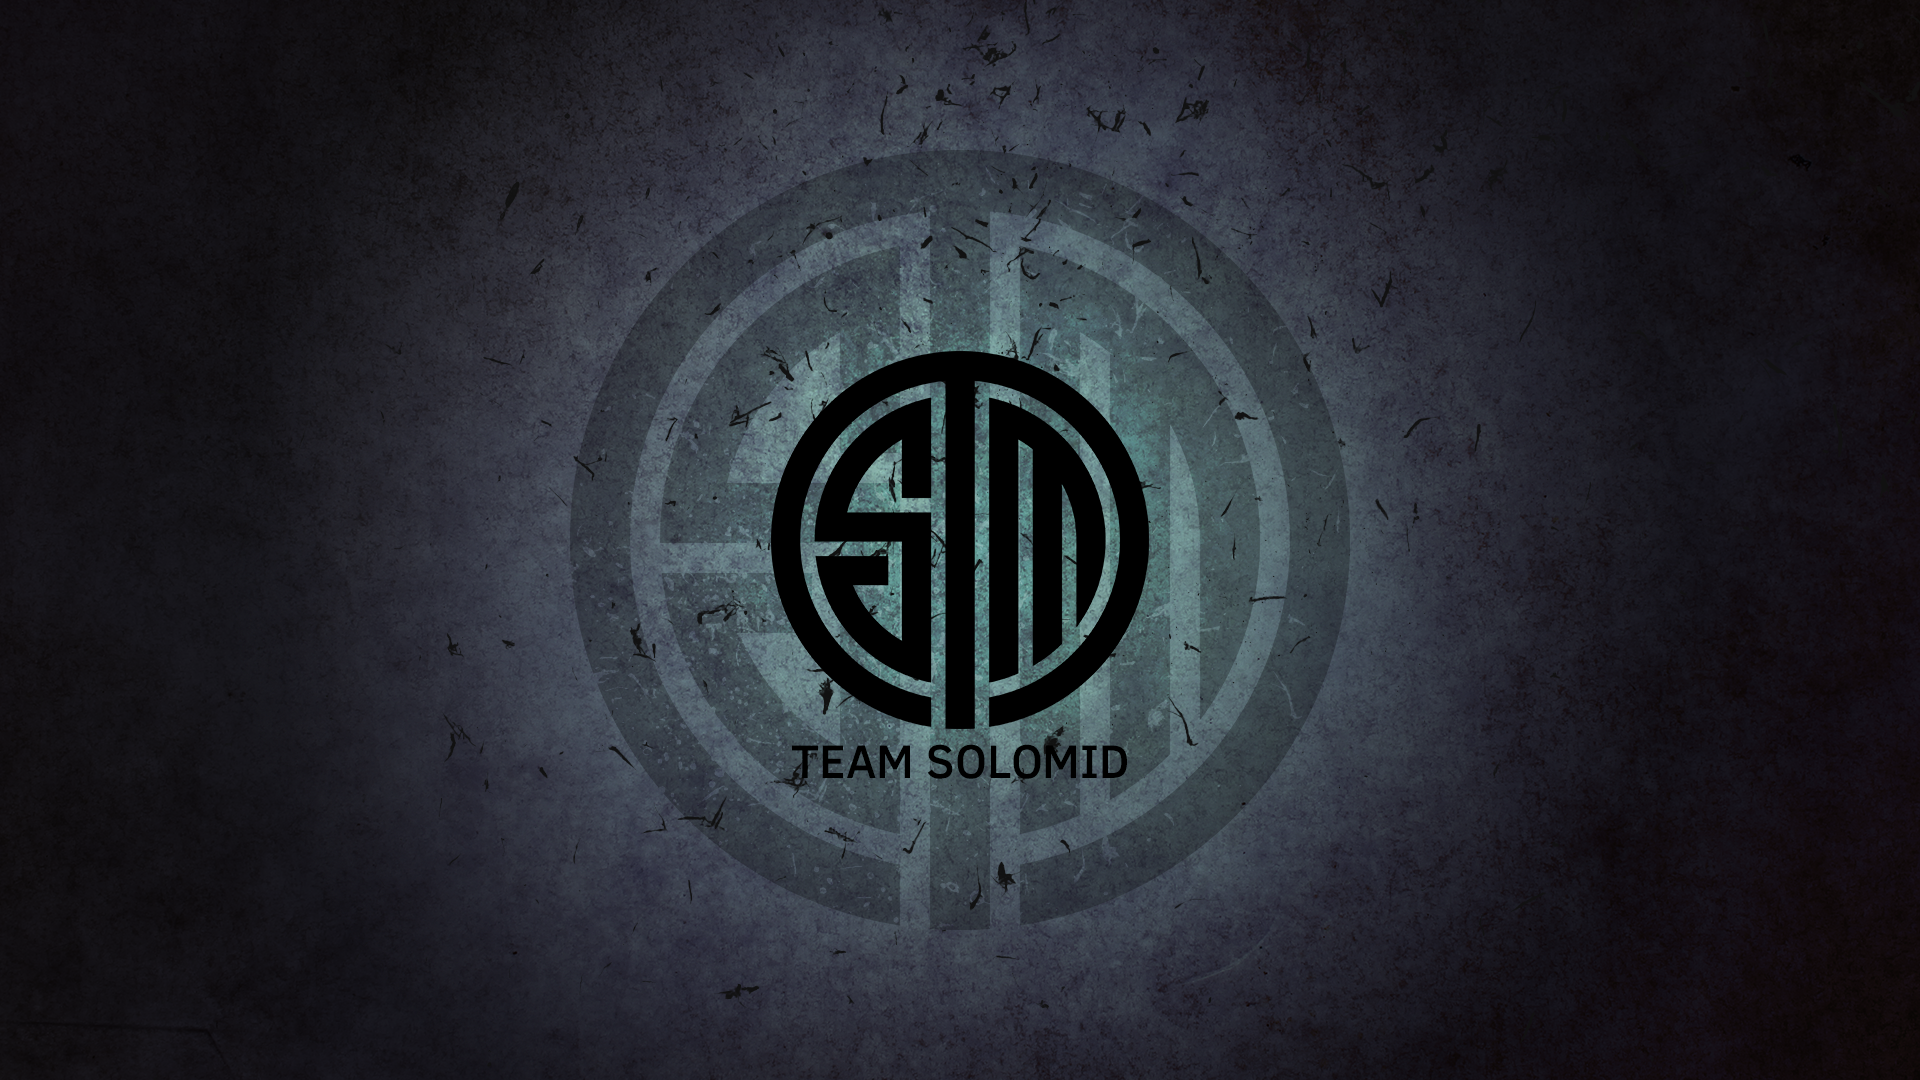 General 1920x1080 Team Solomid League of Legends e-sports PC gaming logo